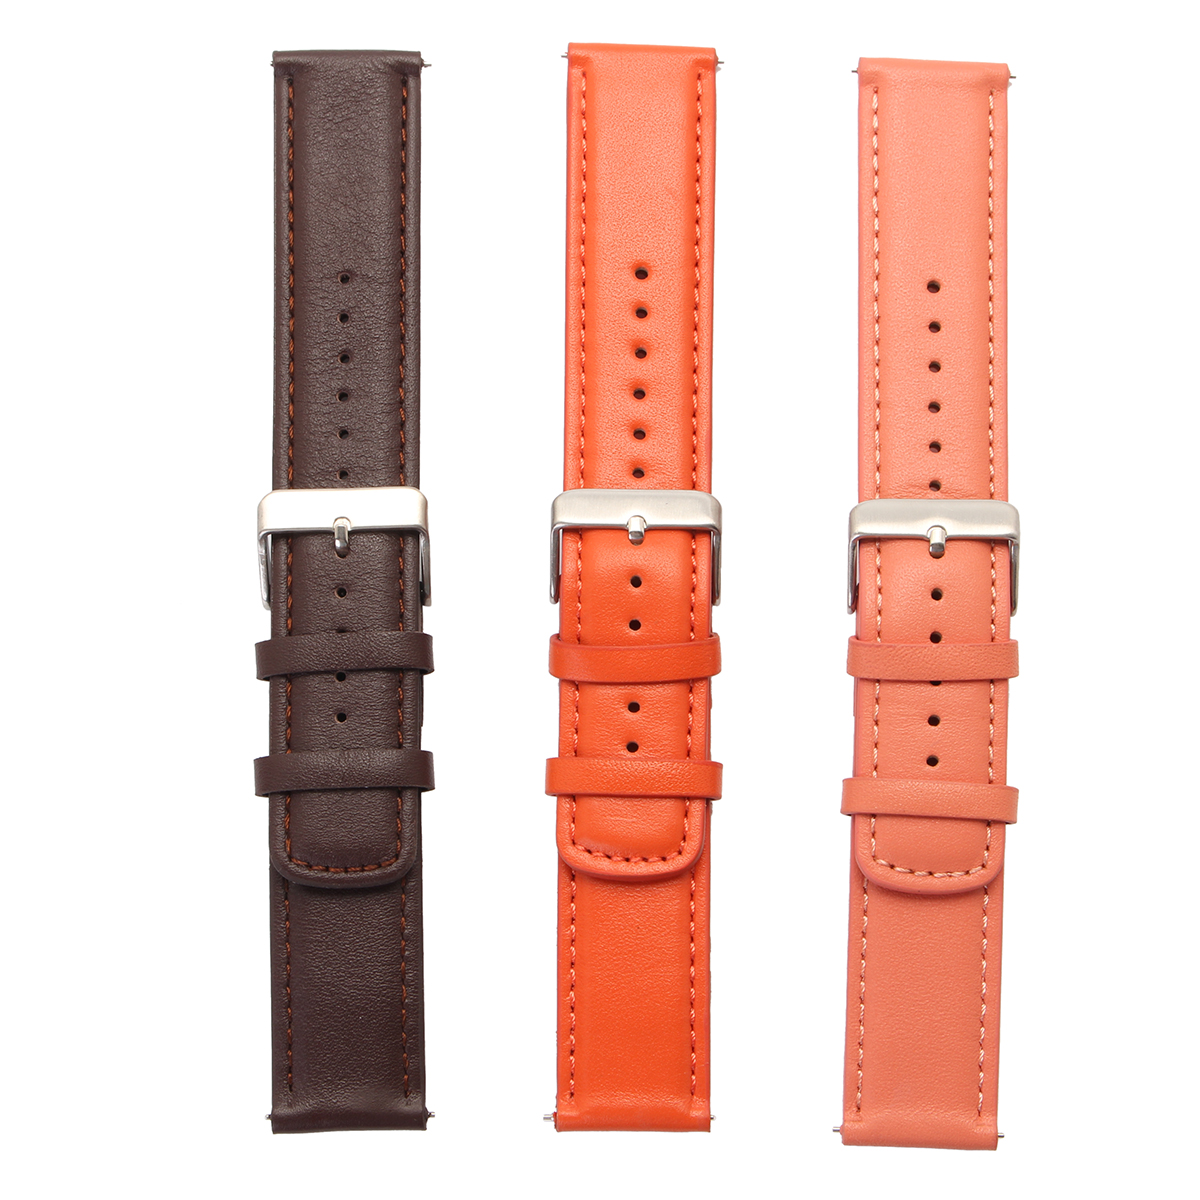 22mm-Replaceable-Leather-Watch-Band-Strap-Bracelet-Time-Steel-for-Samsung-Gear-2S2-1209571